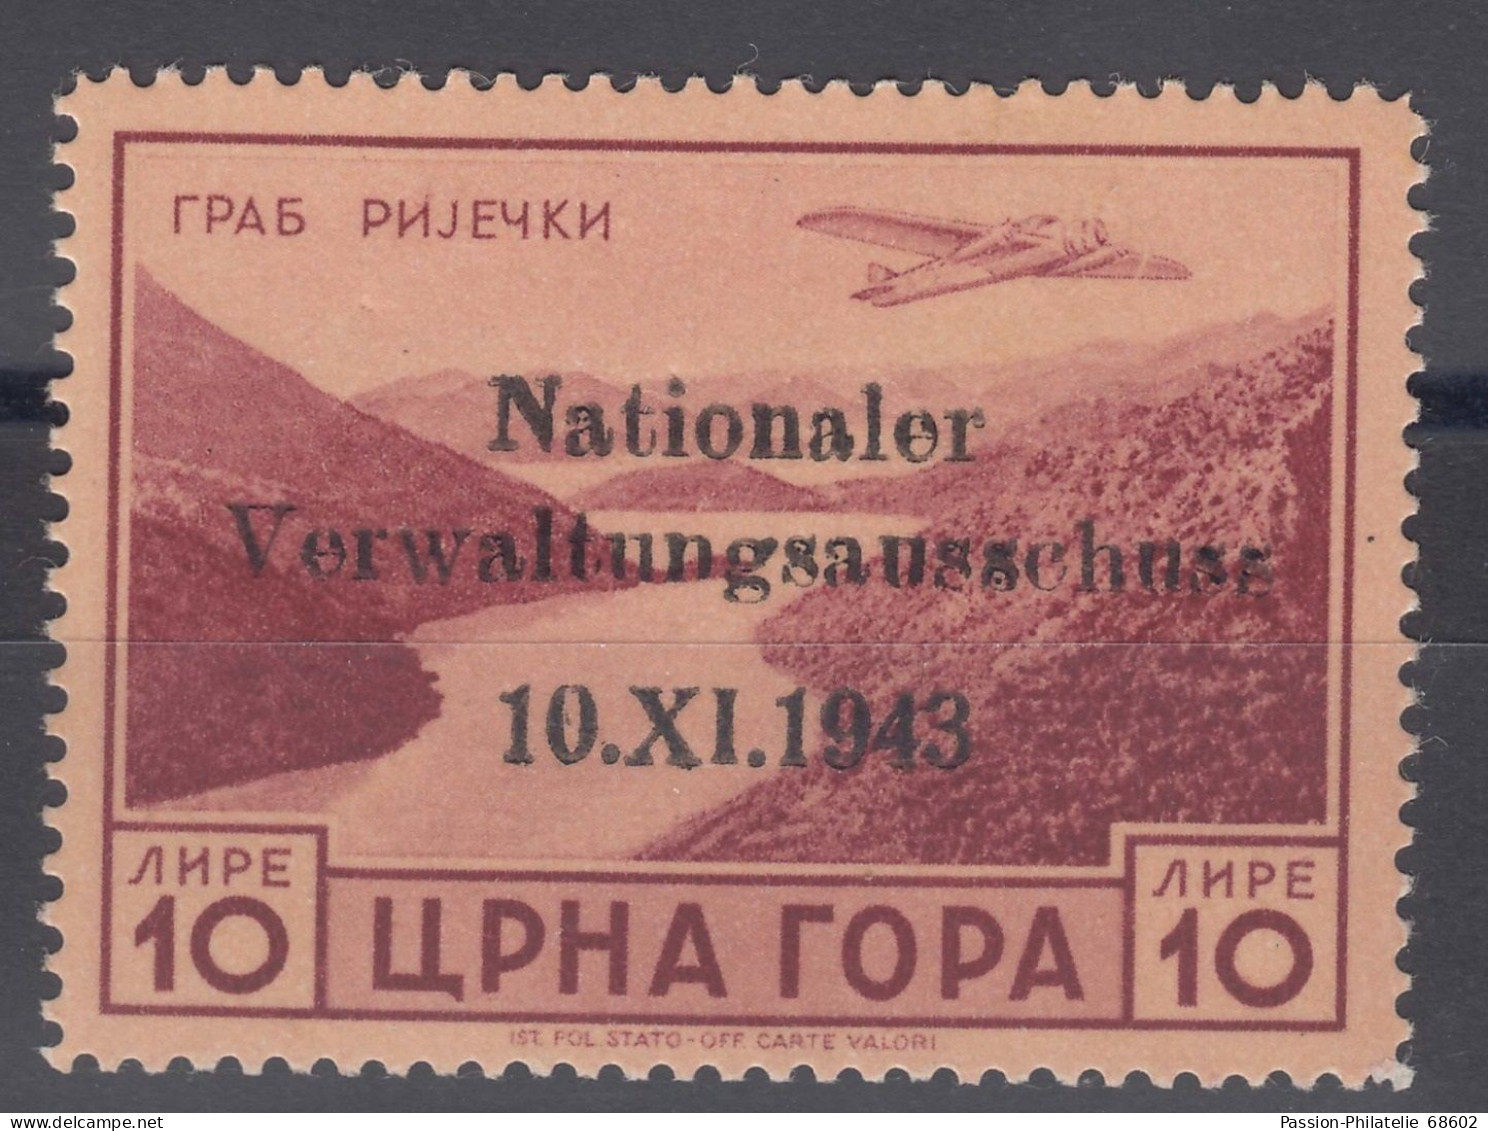 Germany Occupation Of Montenegro In WWII Complete 1943-1944 Mi#1-35 Excellent Never Hinged, Attest On Two Key Stamps - Bezetting 1938-45